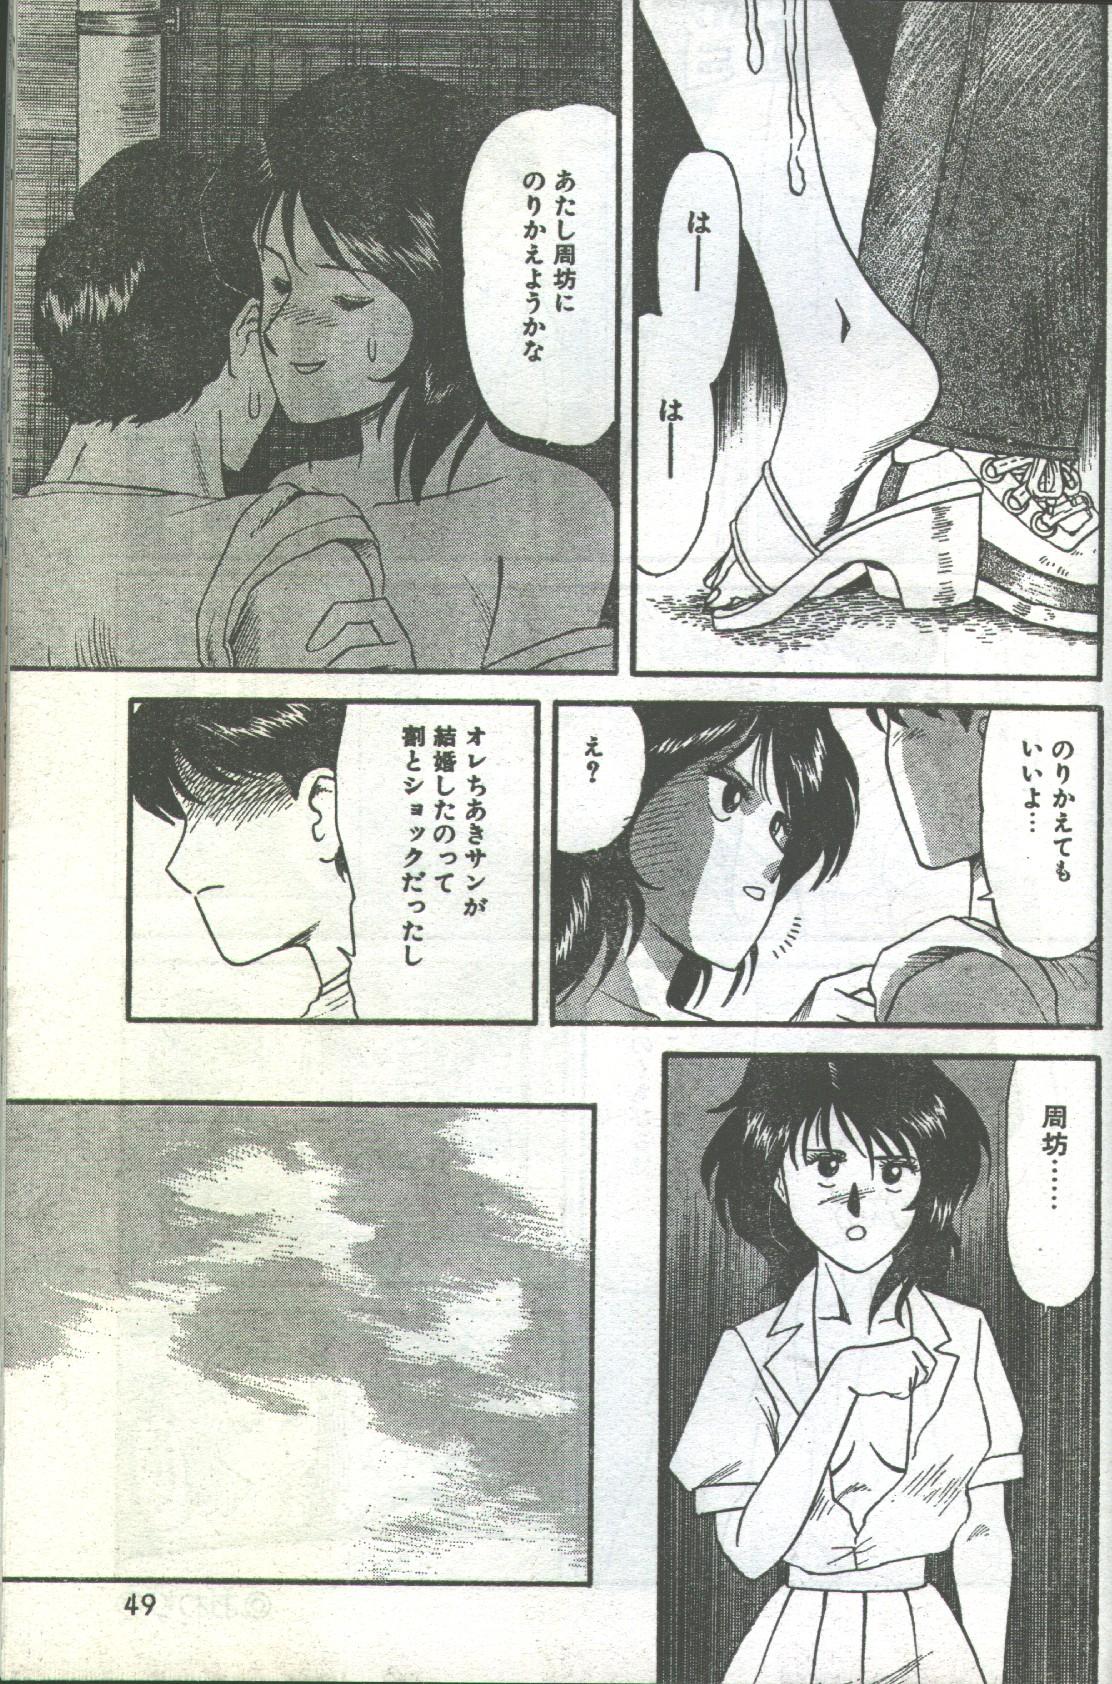 Cotton Comic 1993-07-08 [Incomplete] page 35 full